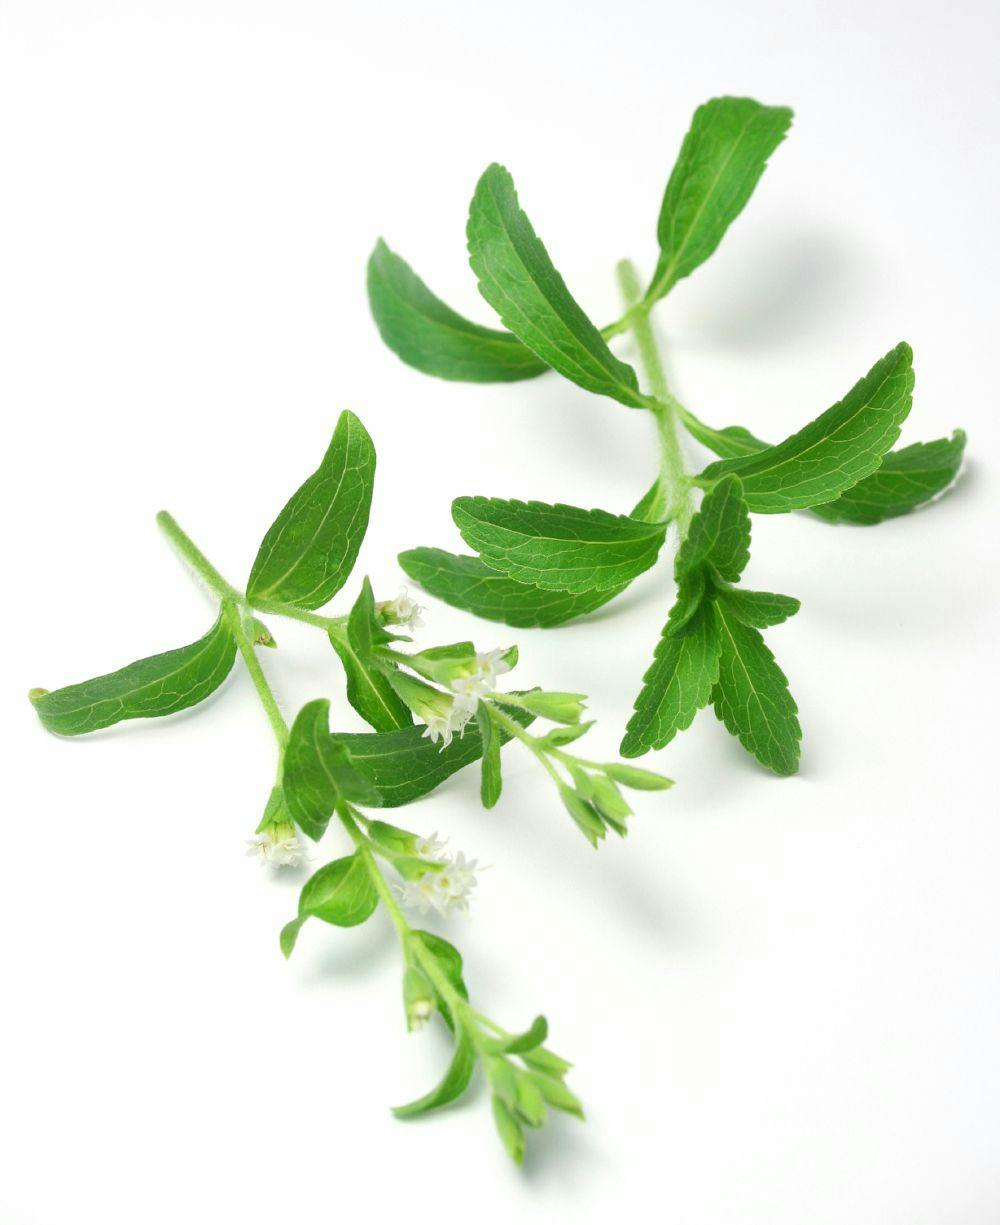 SoPure stevia manufacturer changes company name to Howtian